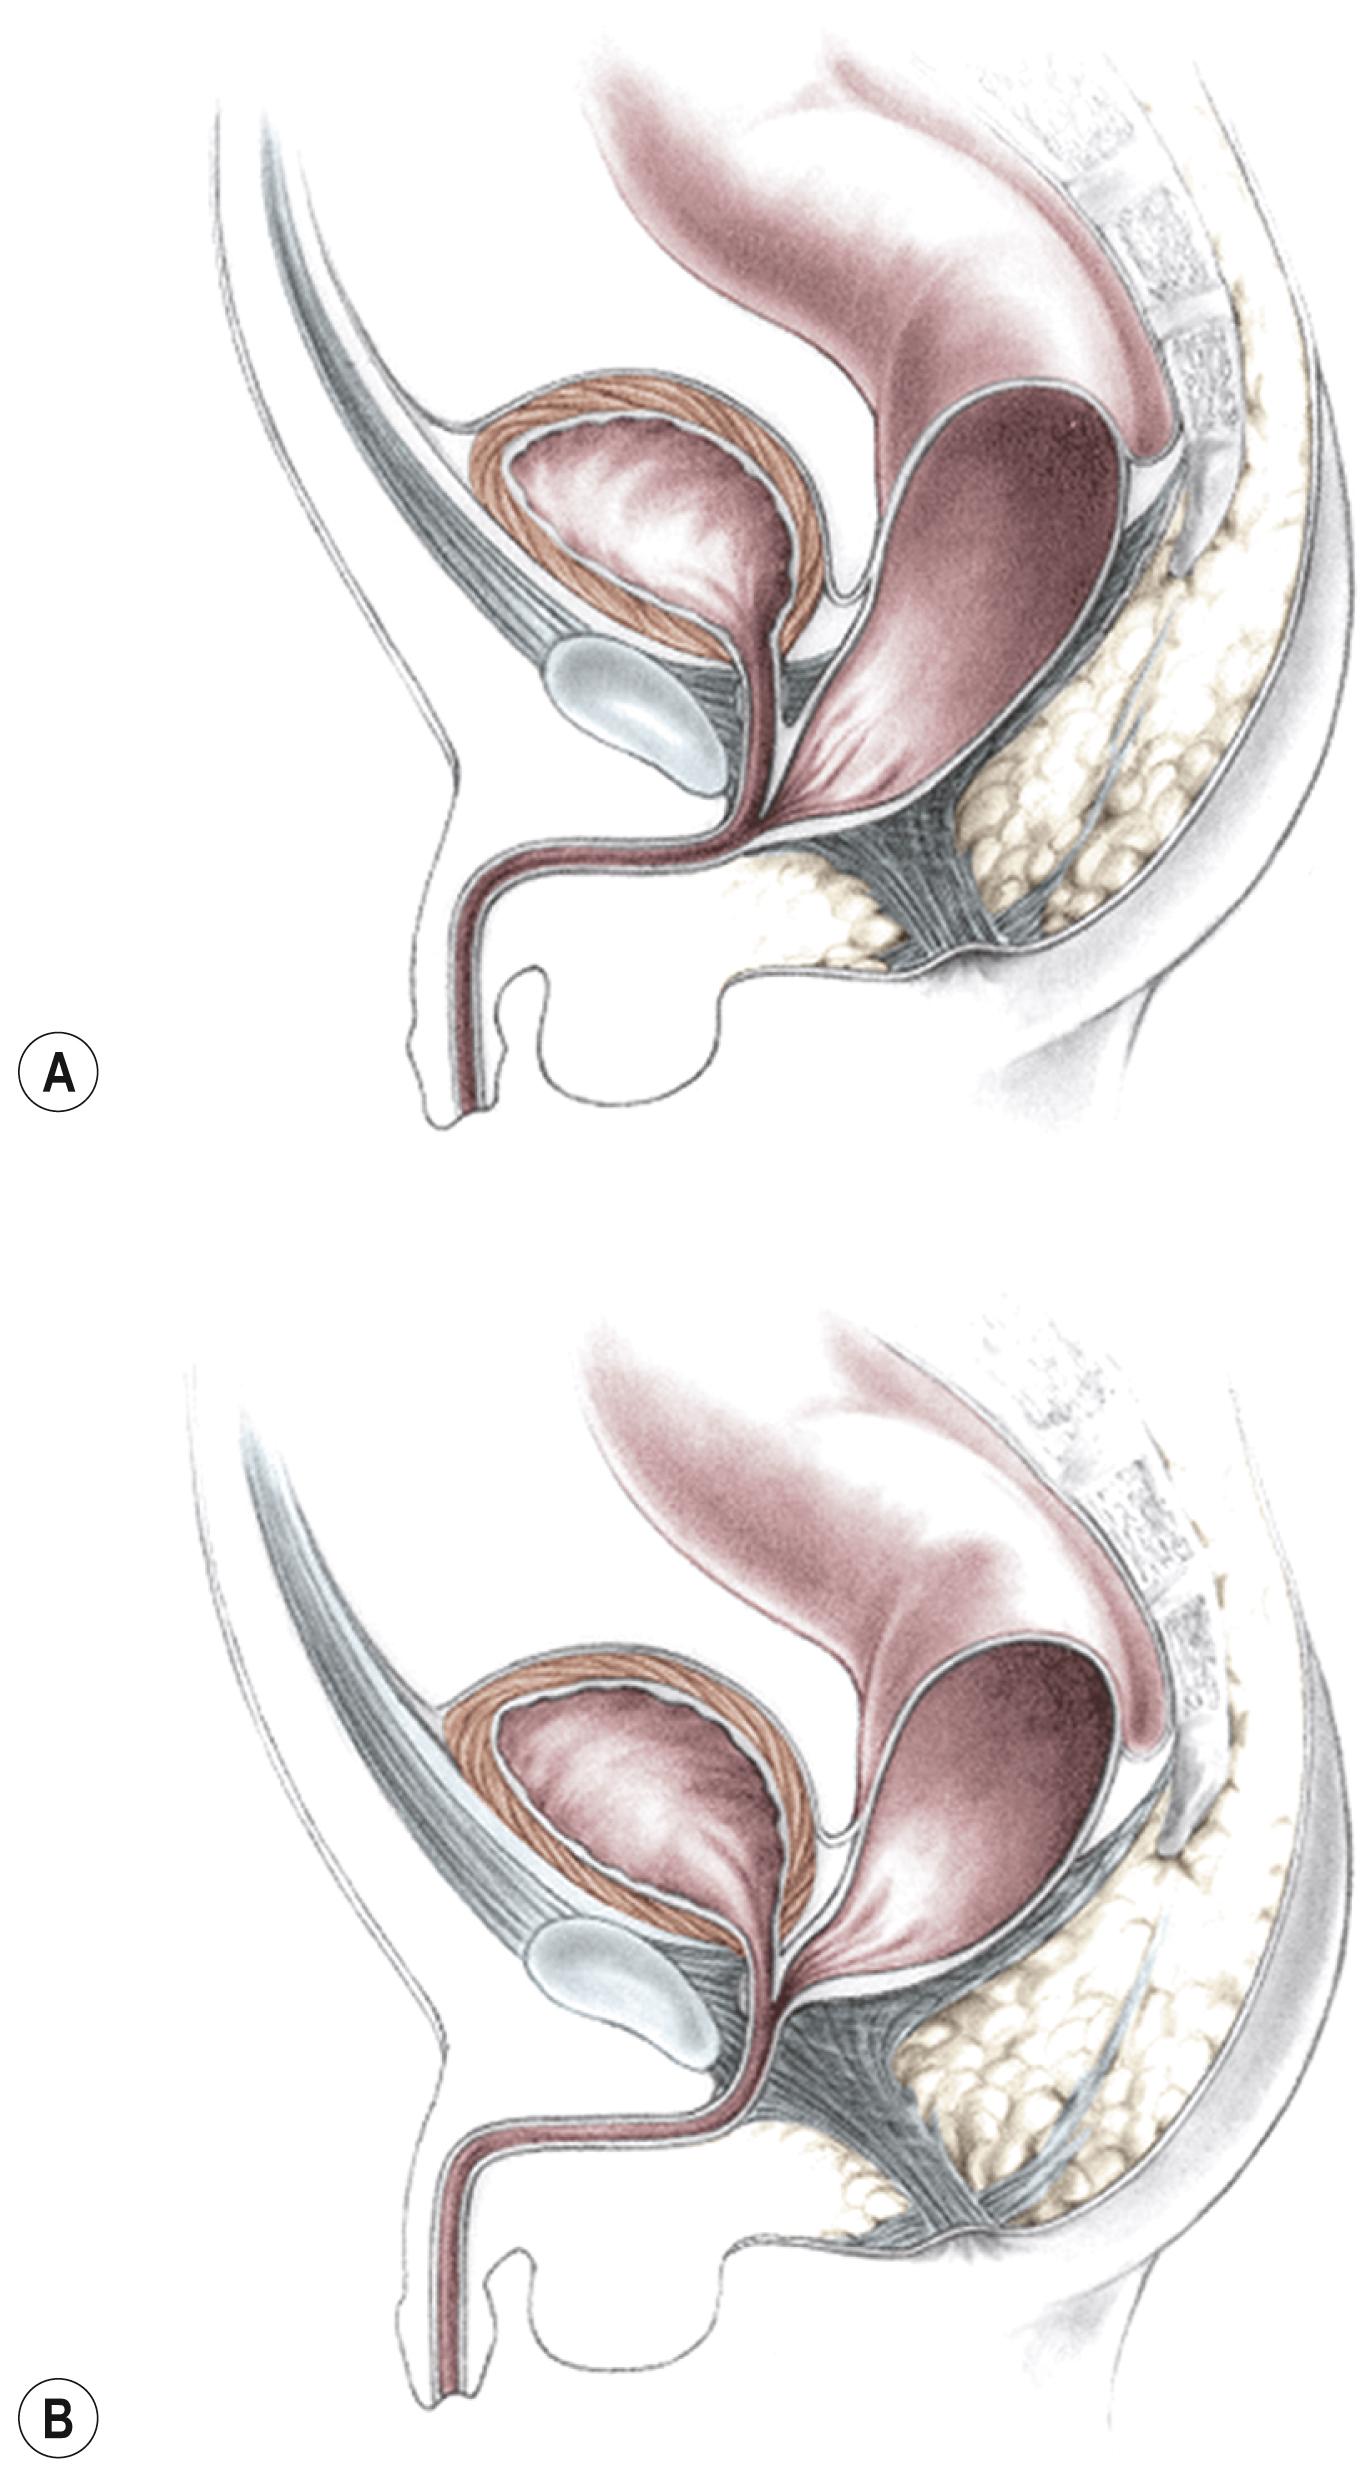 Fig. 35.3, Anorectal atresia with rectourethral fistulas. (A) Rectourethrobulbar fistula. (B) Rectourethroprostatic fistula.